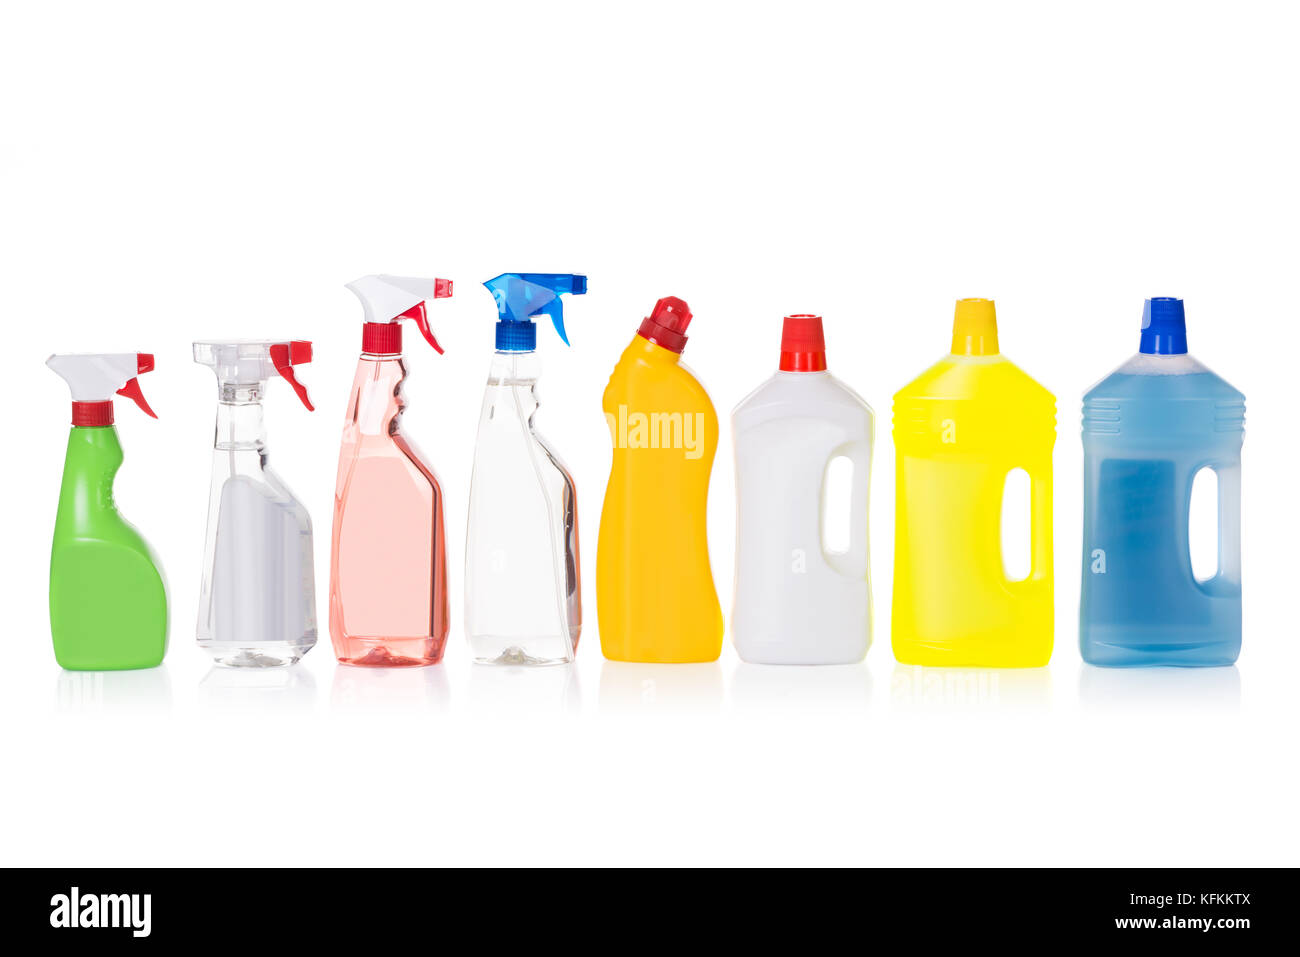 Cleaning liquid bottles in row. Isolated on white Stock Photo